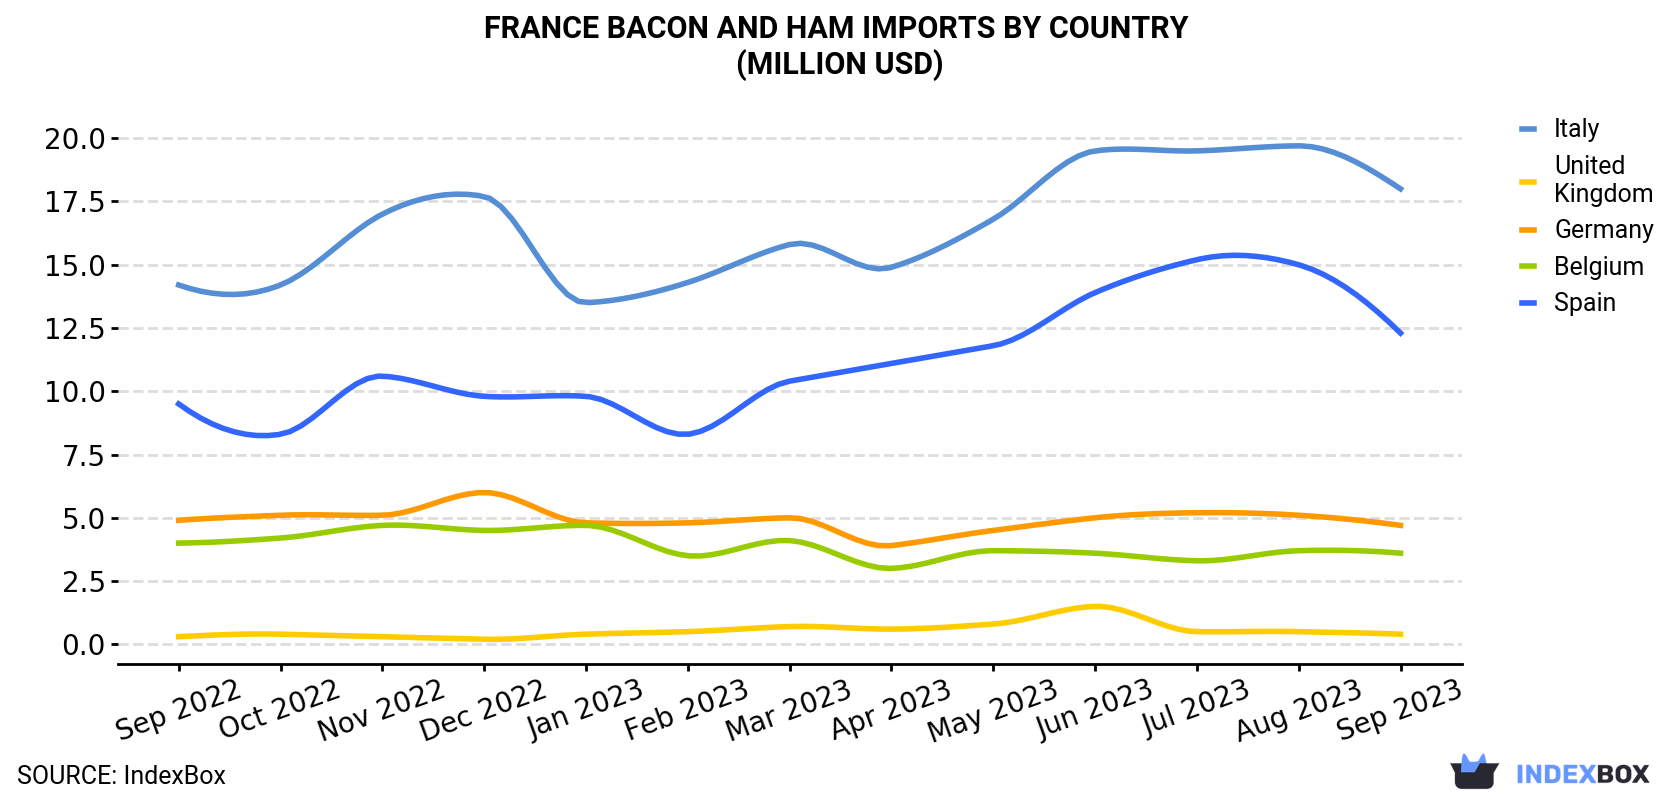 France Bacon And Ham Imports By Country (Million USD)